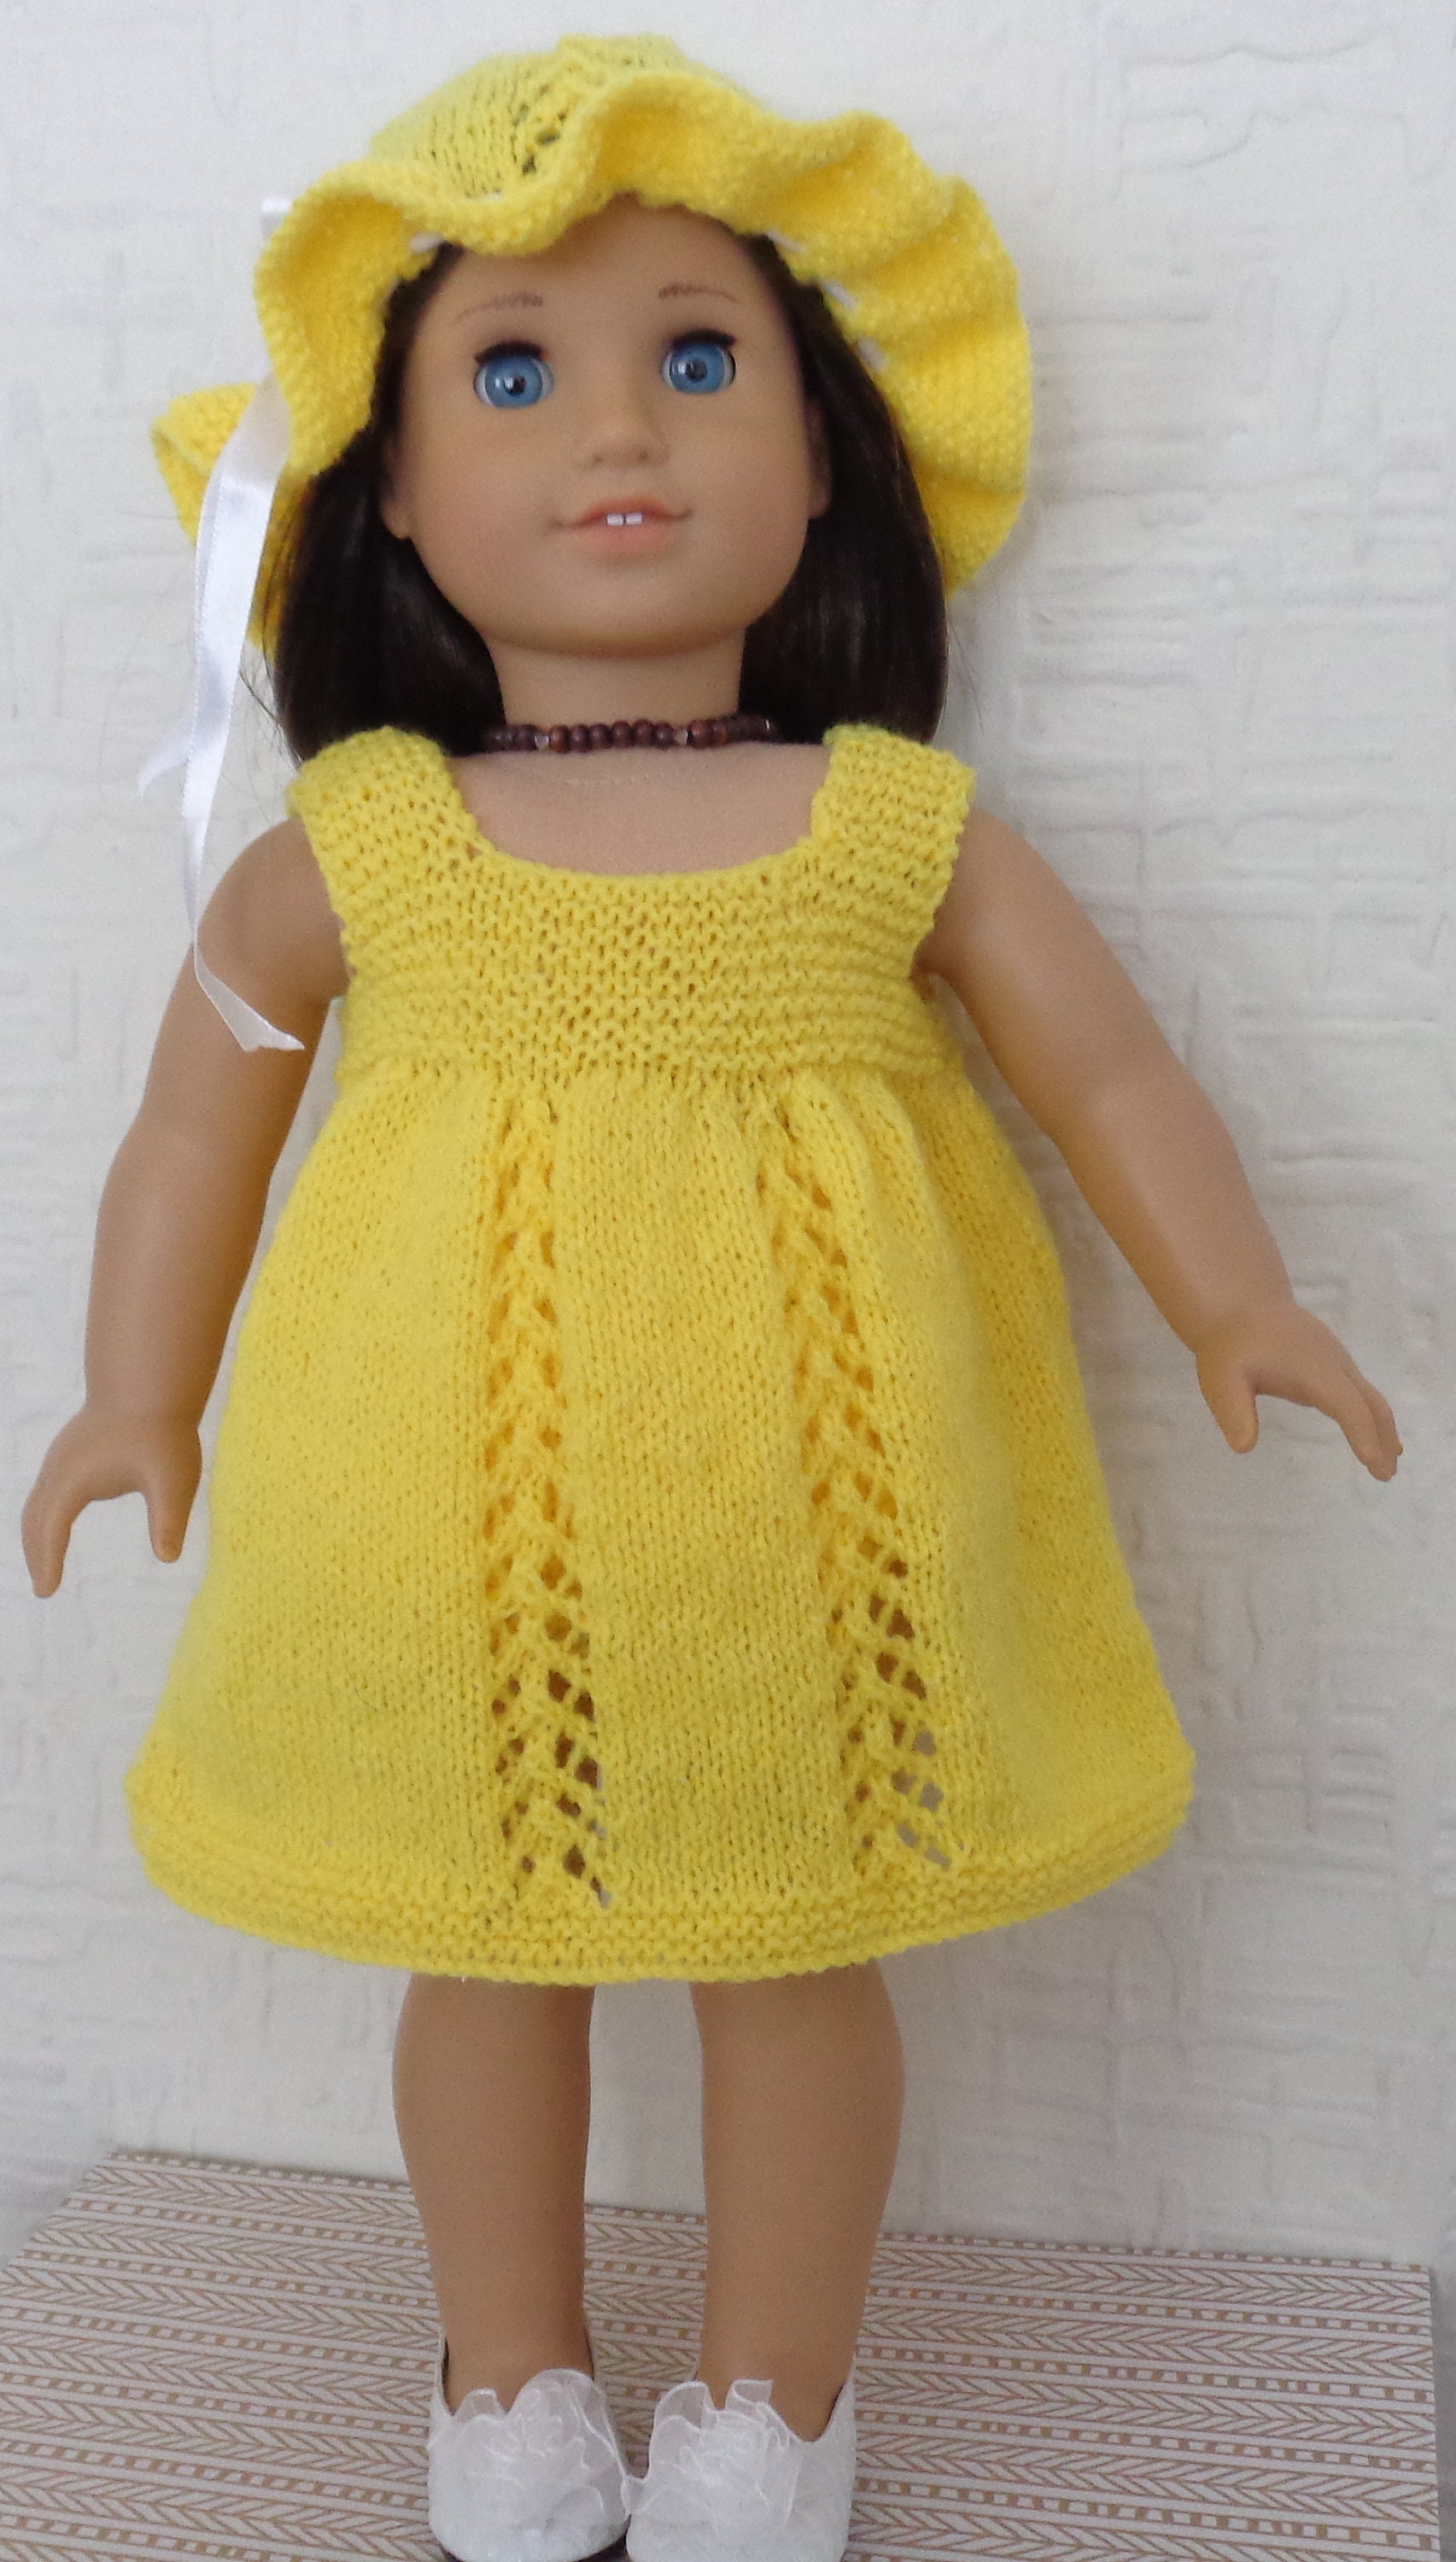 Doll knitting pattern Gorgeous summery outfit in 4 ply yarn to | Etsy